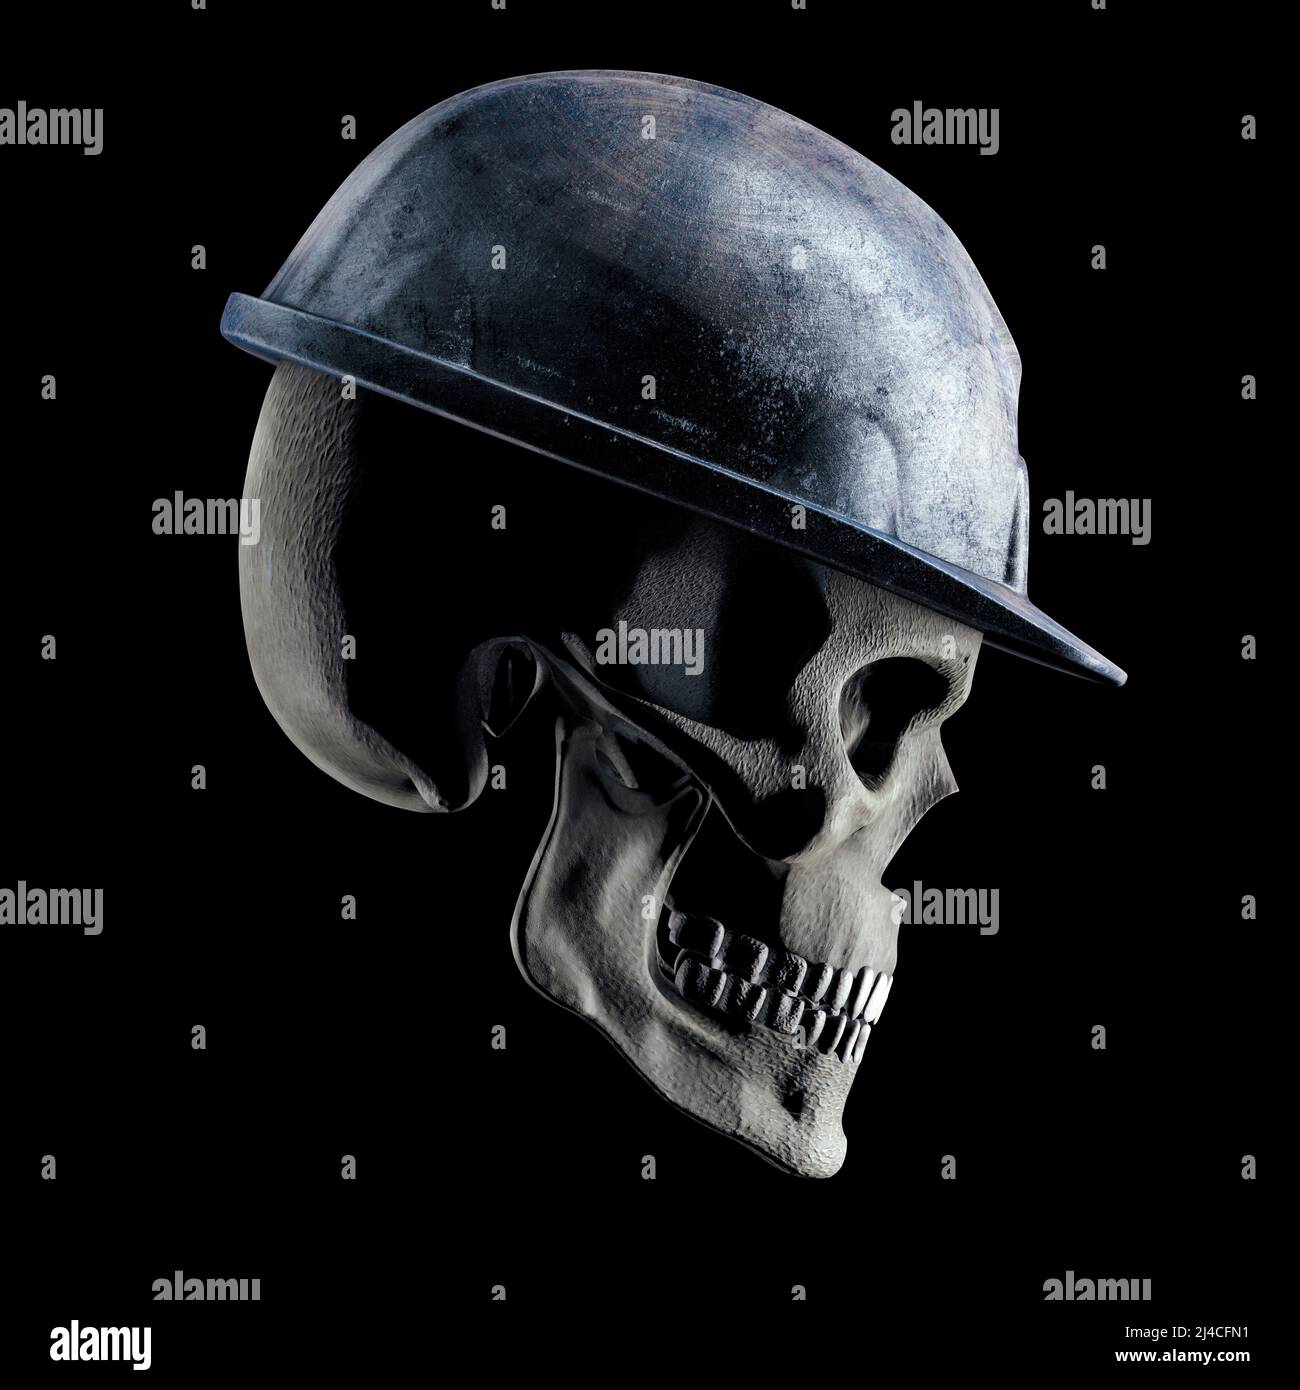 Undead worker - 3D illustration of grungy skull wearing old battered hard hat isolated on black studio background Stock Photo